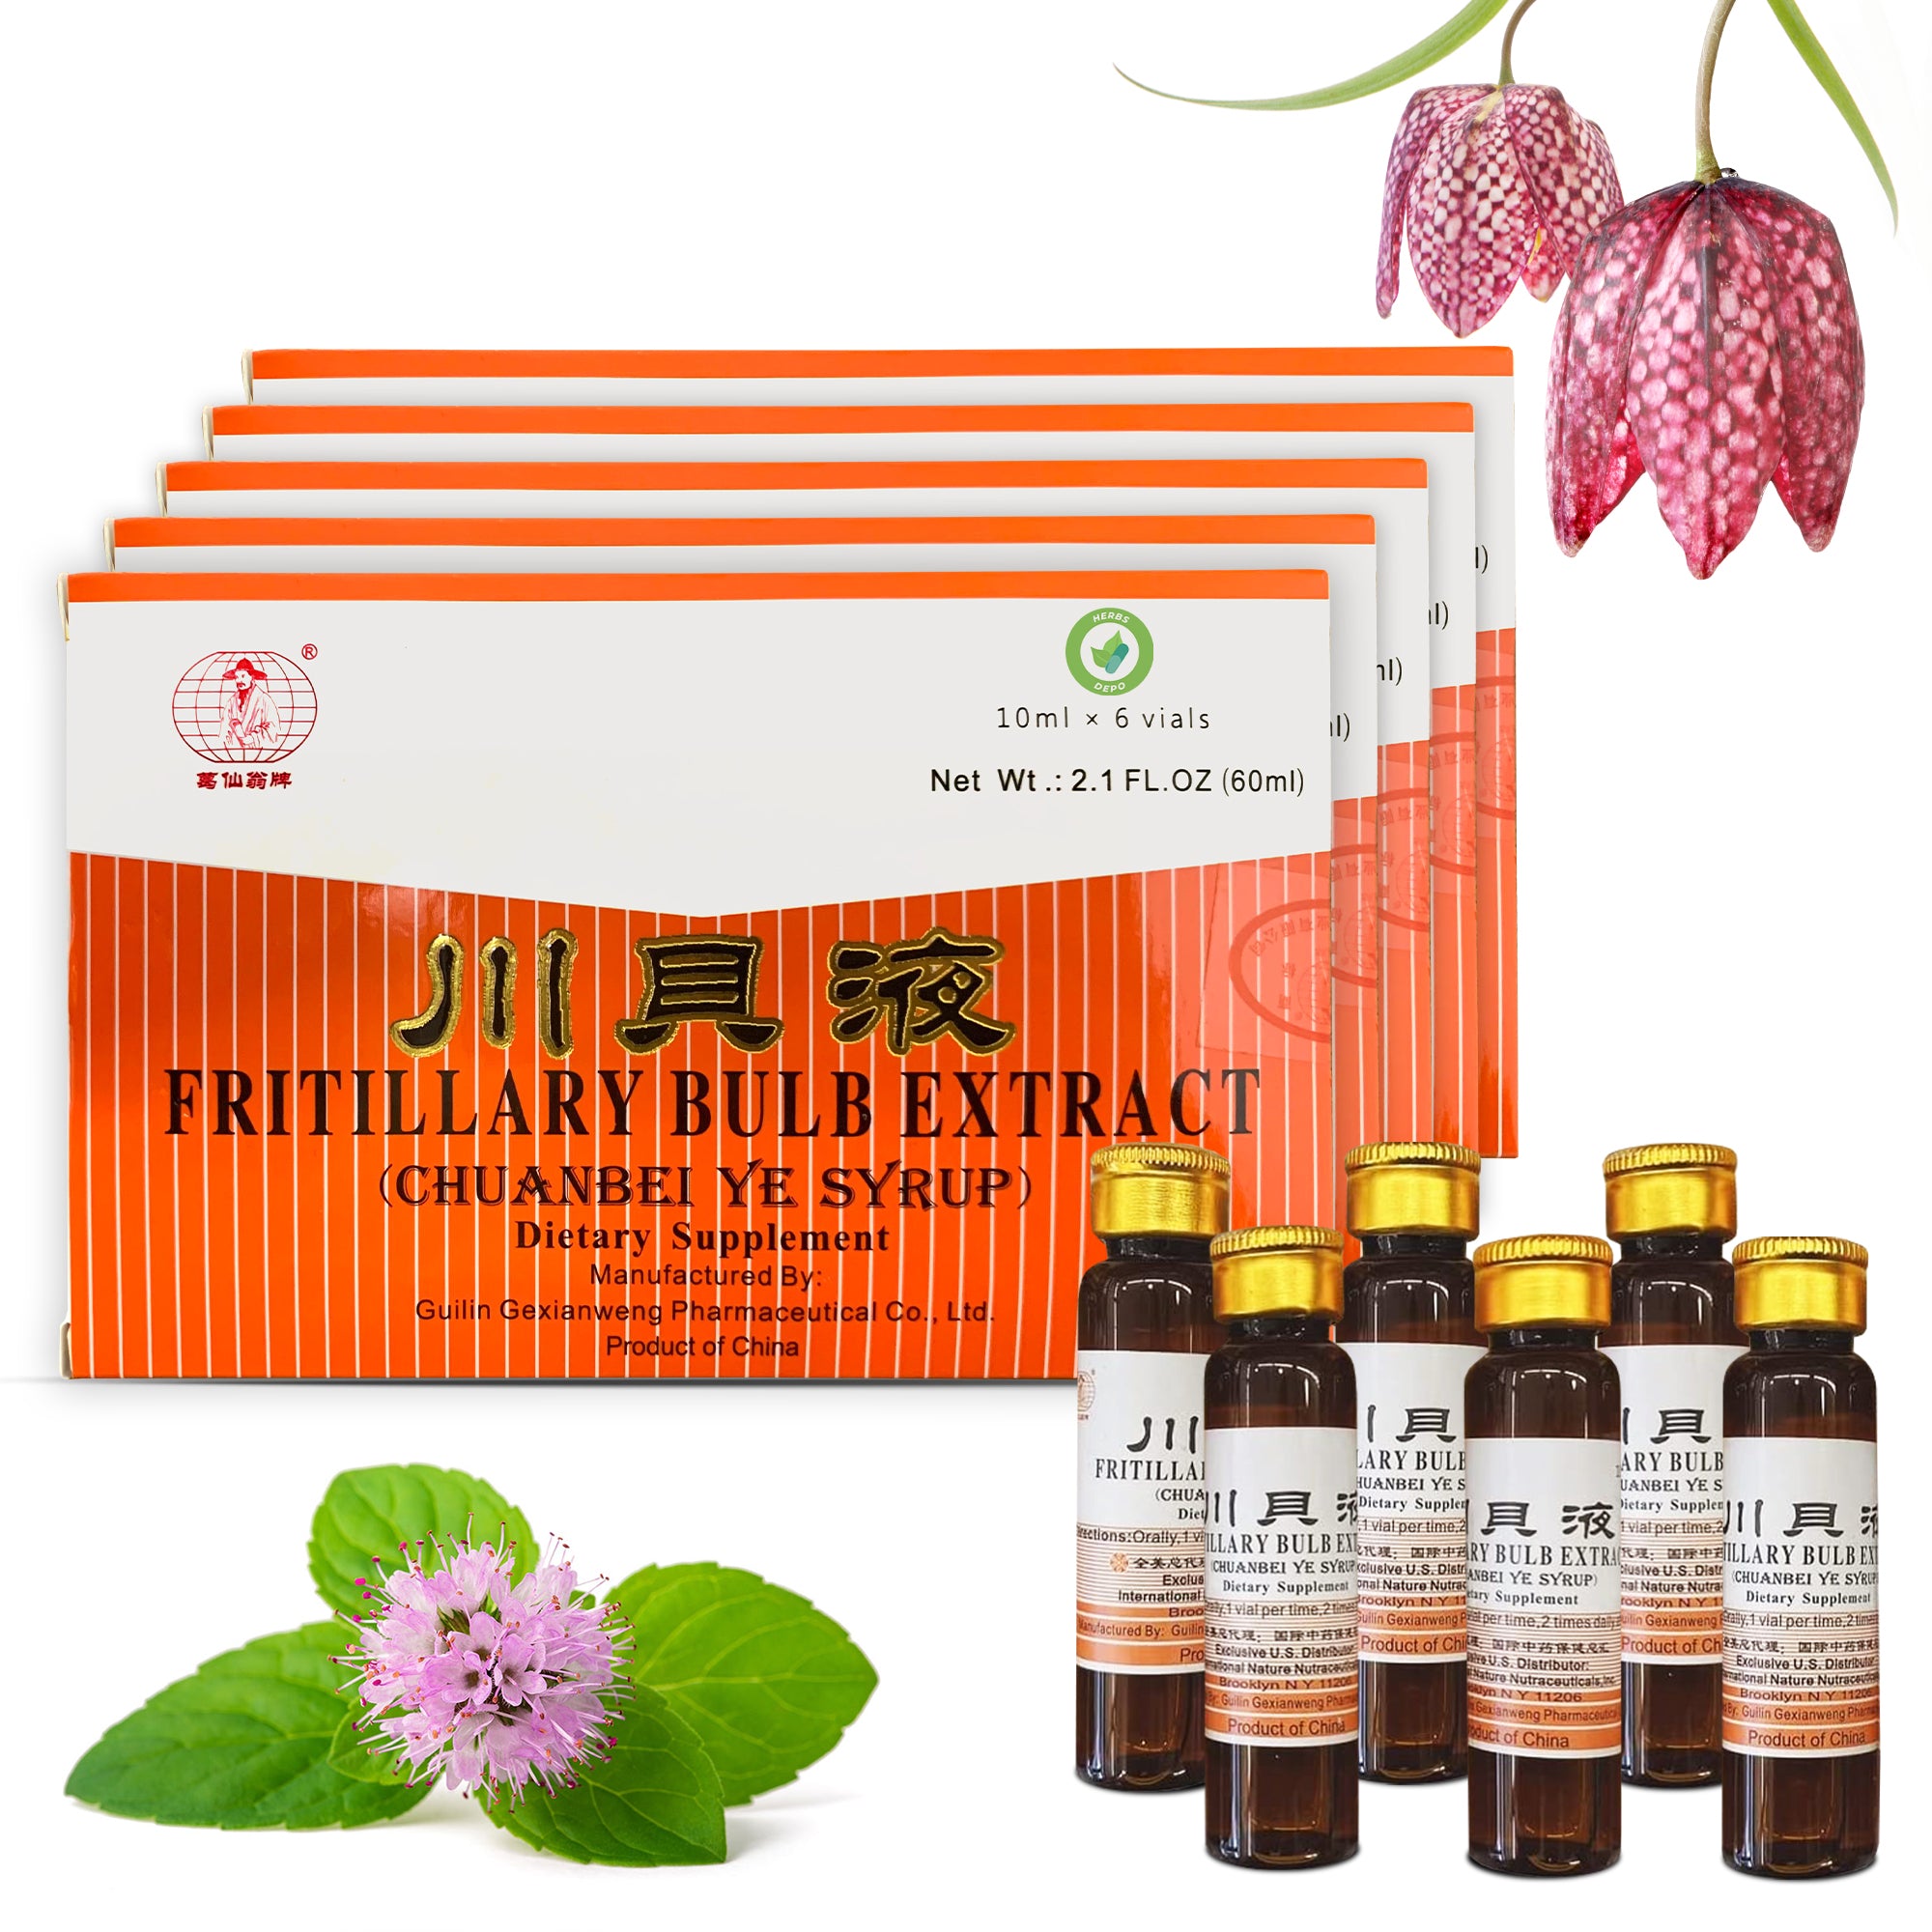 Fritillary Bulb Extract - Sweet, Delicious and Effective Oral Liquid Dietary Supplement Cough Syrup (Chuanbei Ye Syrup) - 6 Bottles (10 ml per)